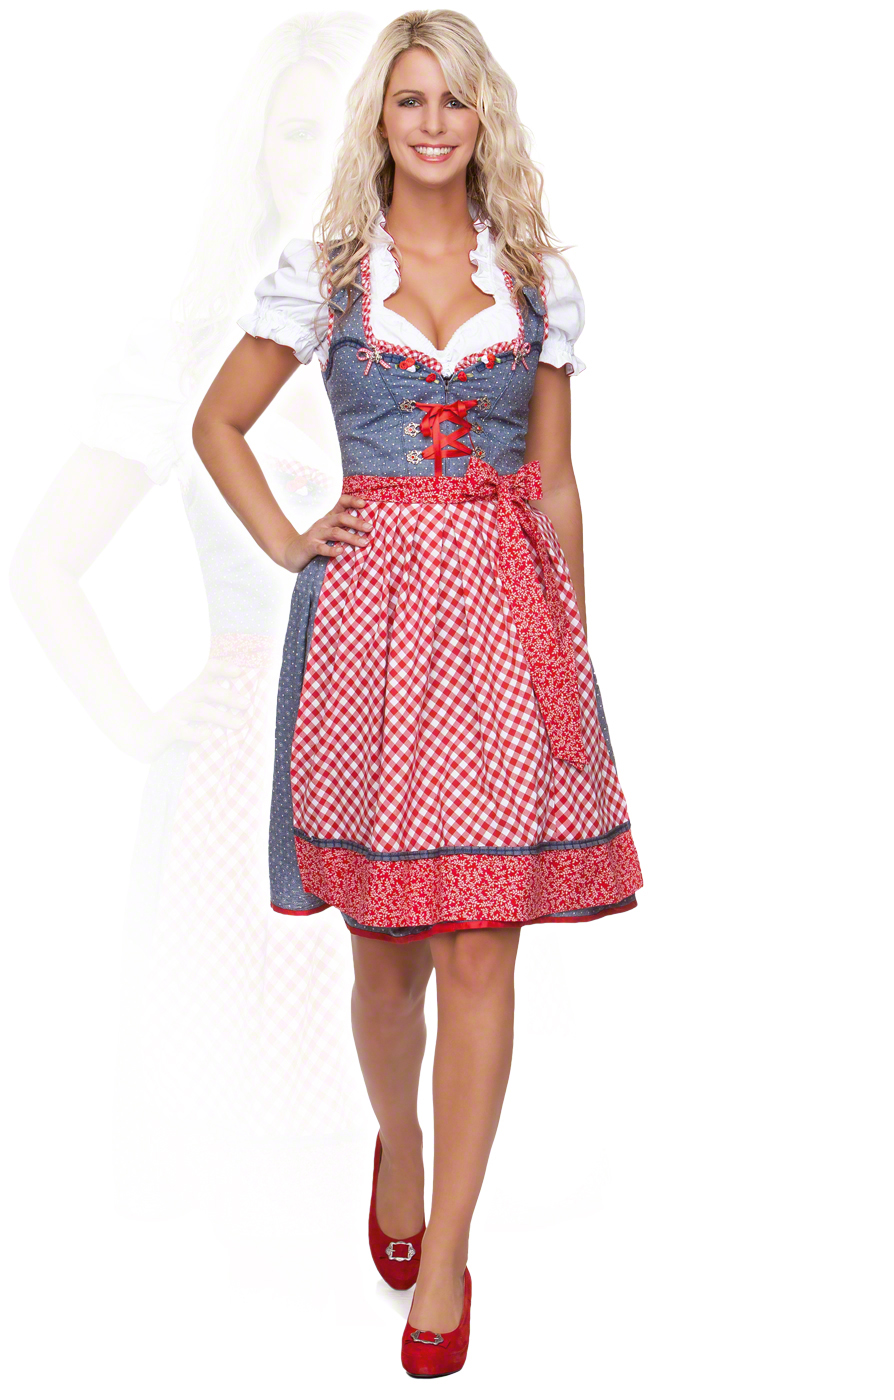 Equipped with the cheap knee-length dirndls for every event